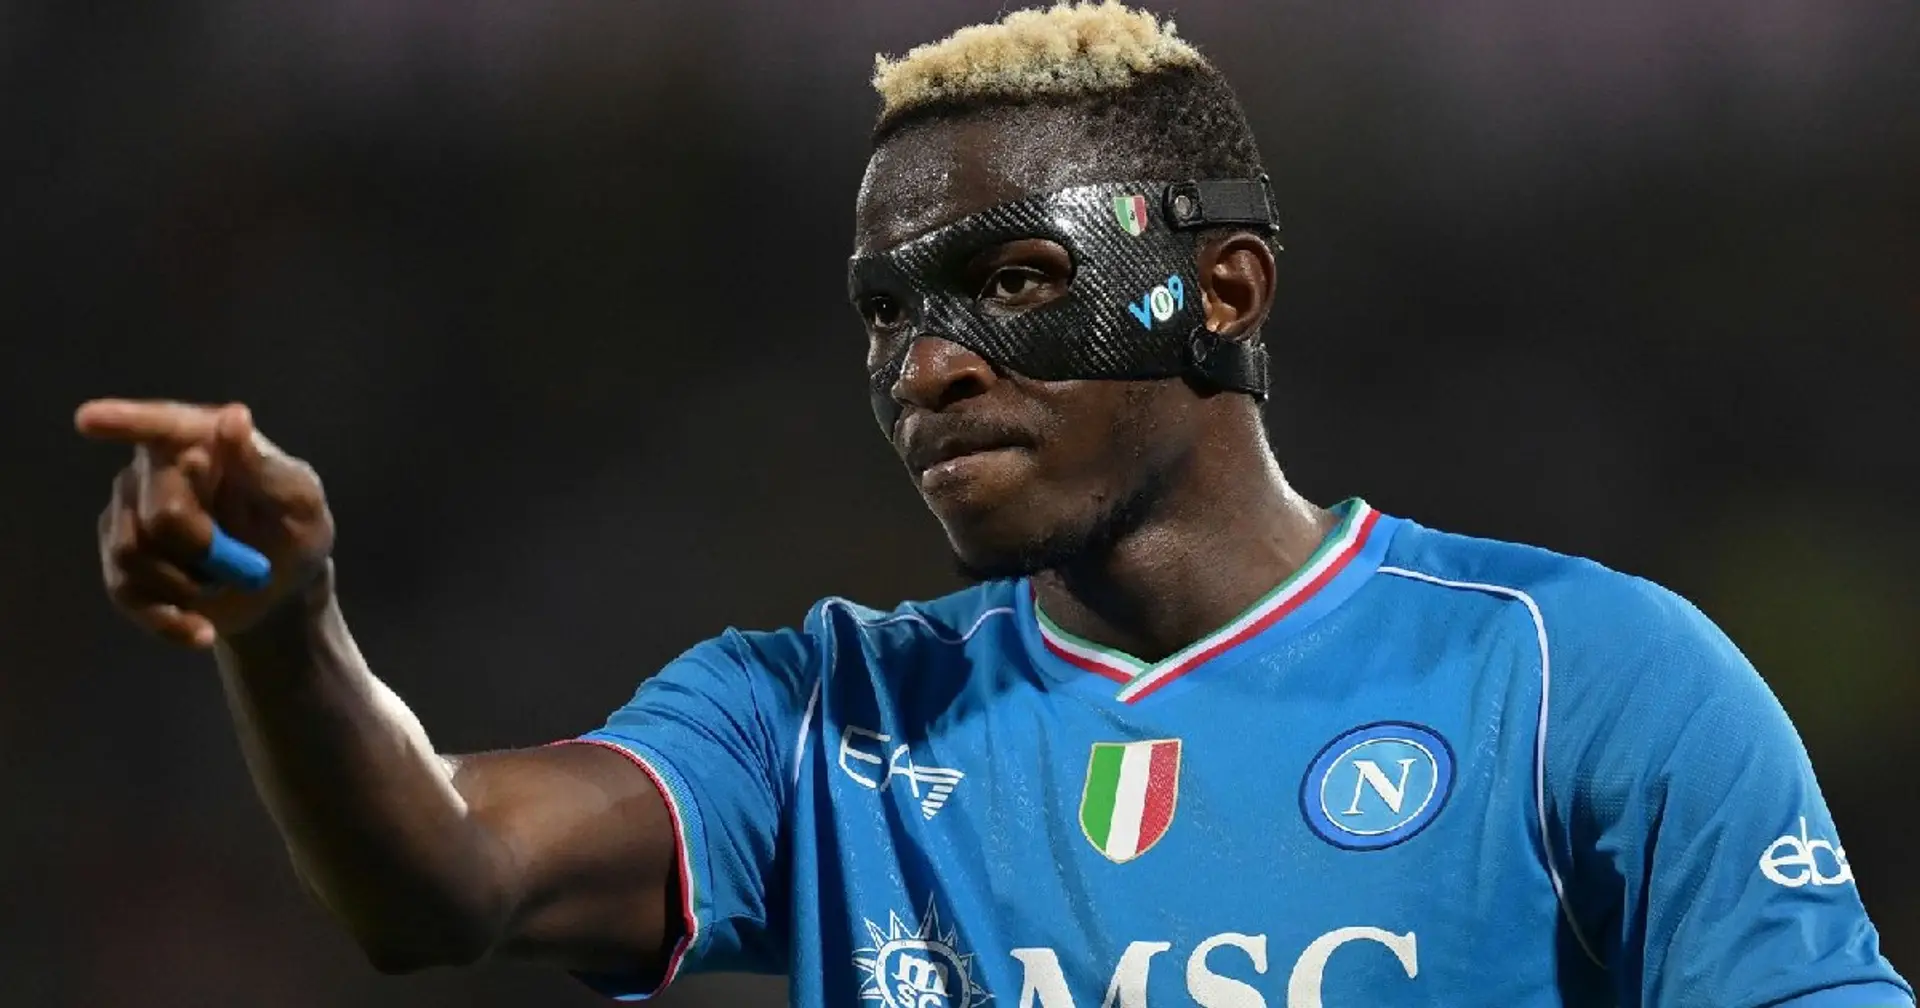 Napoli president confirms Osimhen to leave club: 'Love stories end'